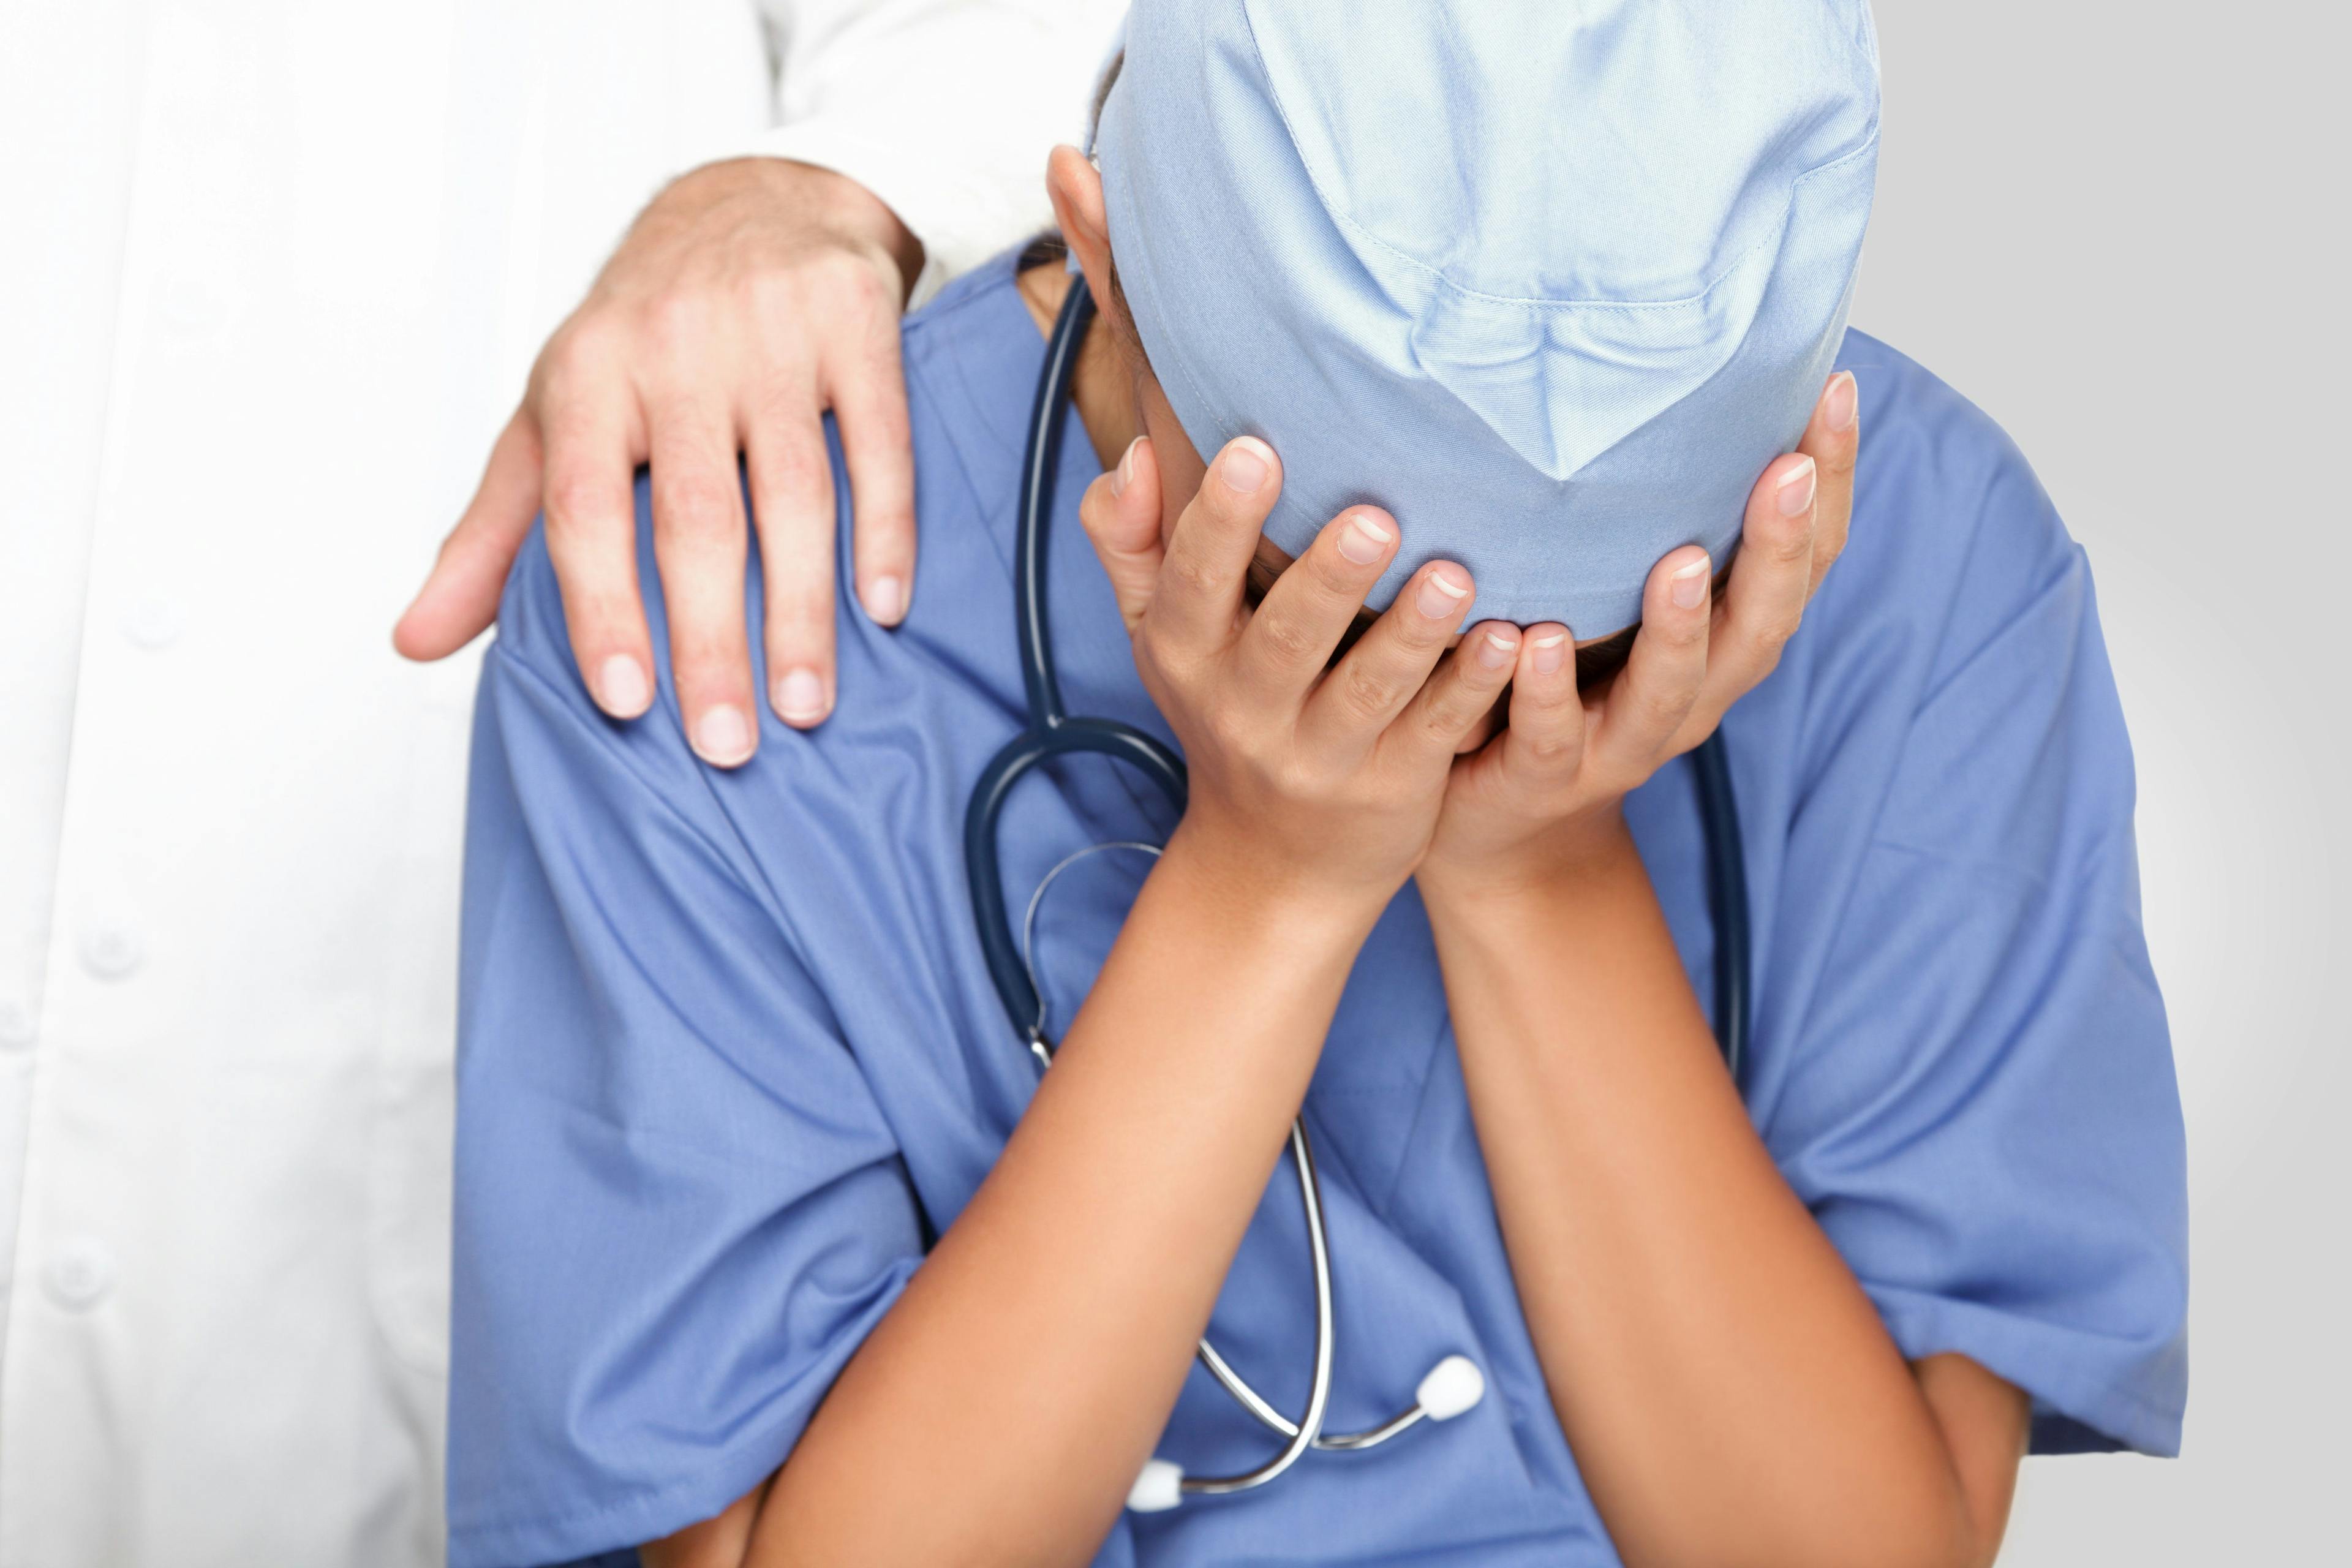 Do independent doctors have a future?